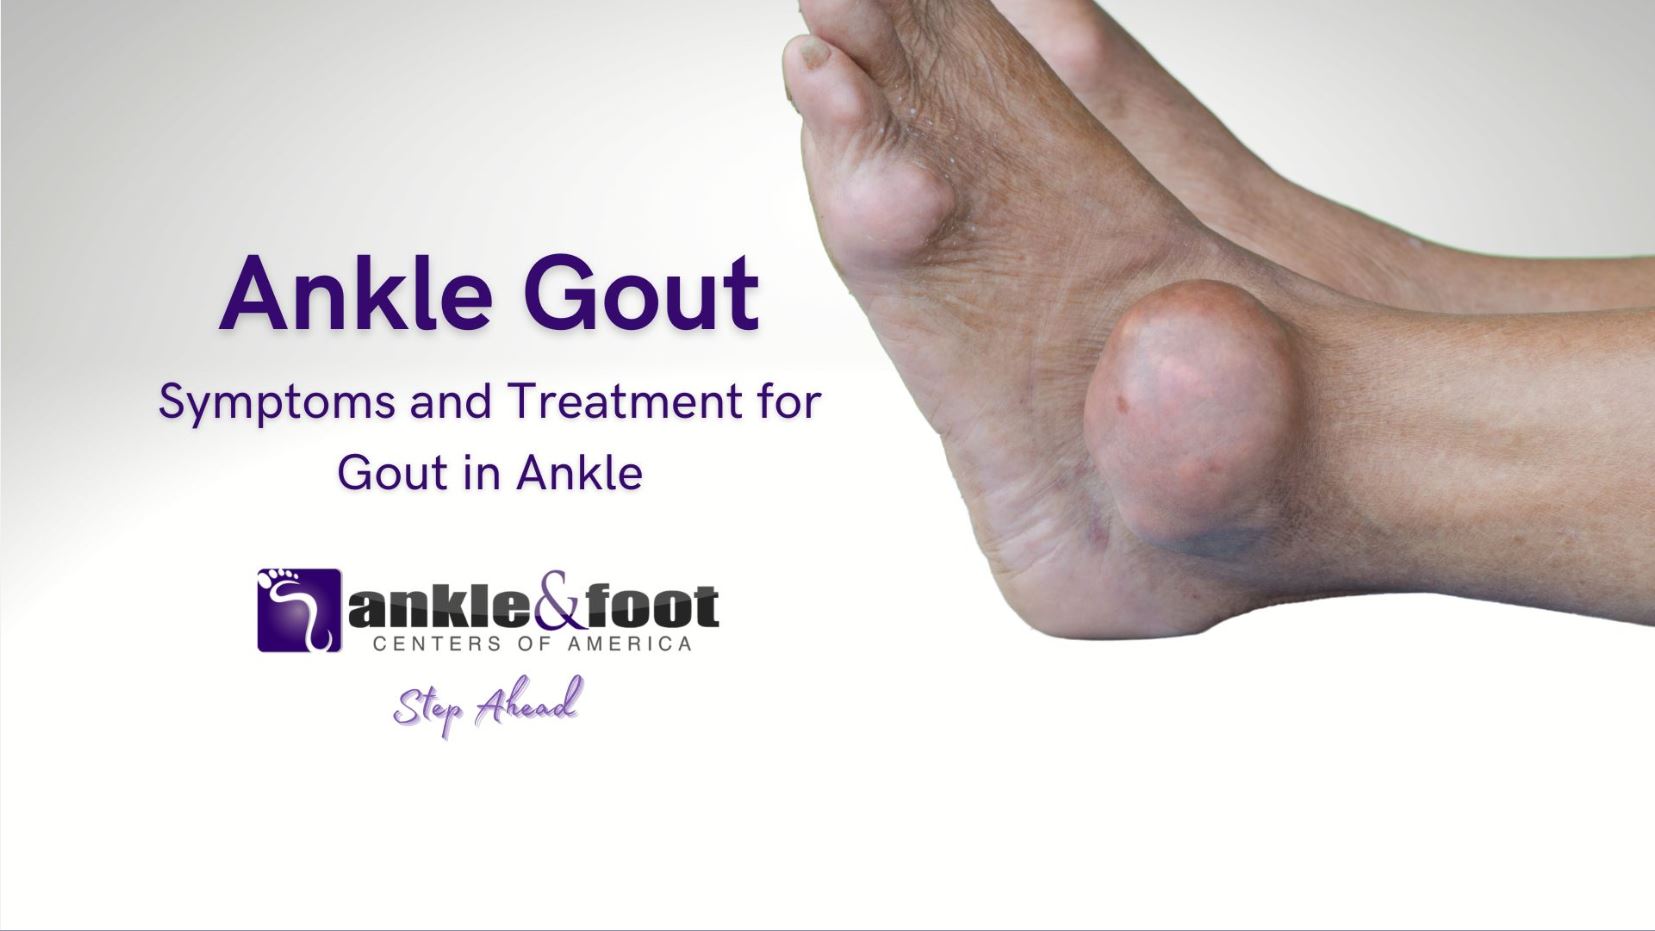 Ankle Gout – Symptoms and Treatment for Gout in Ankle